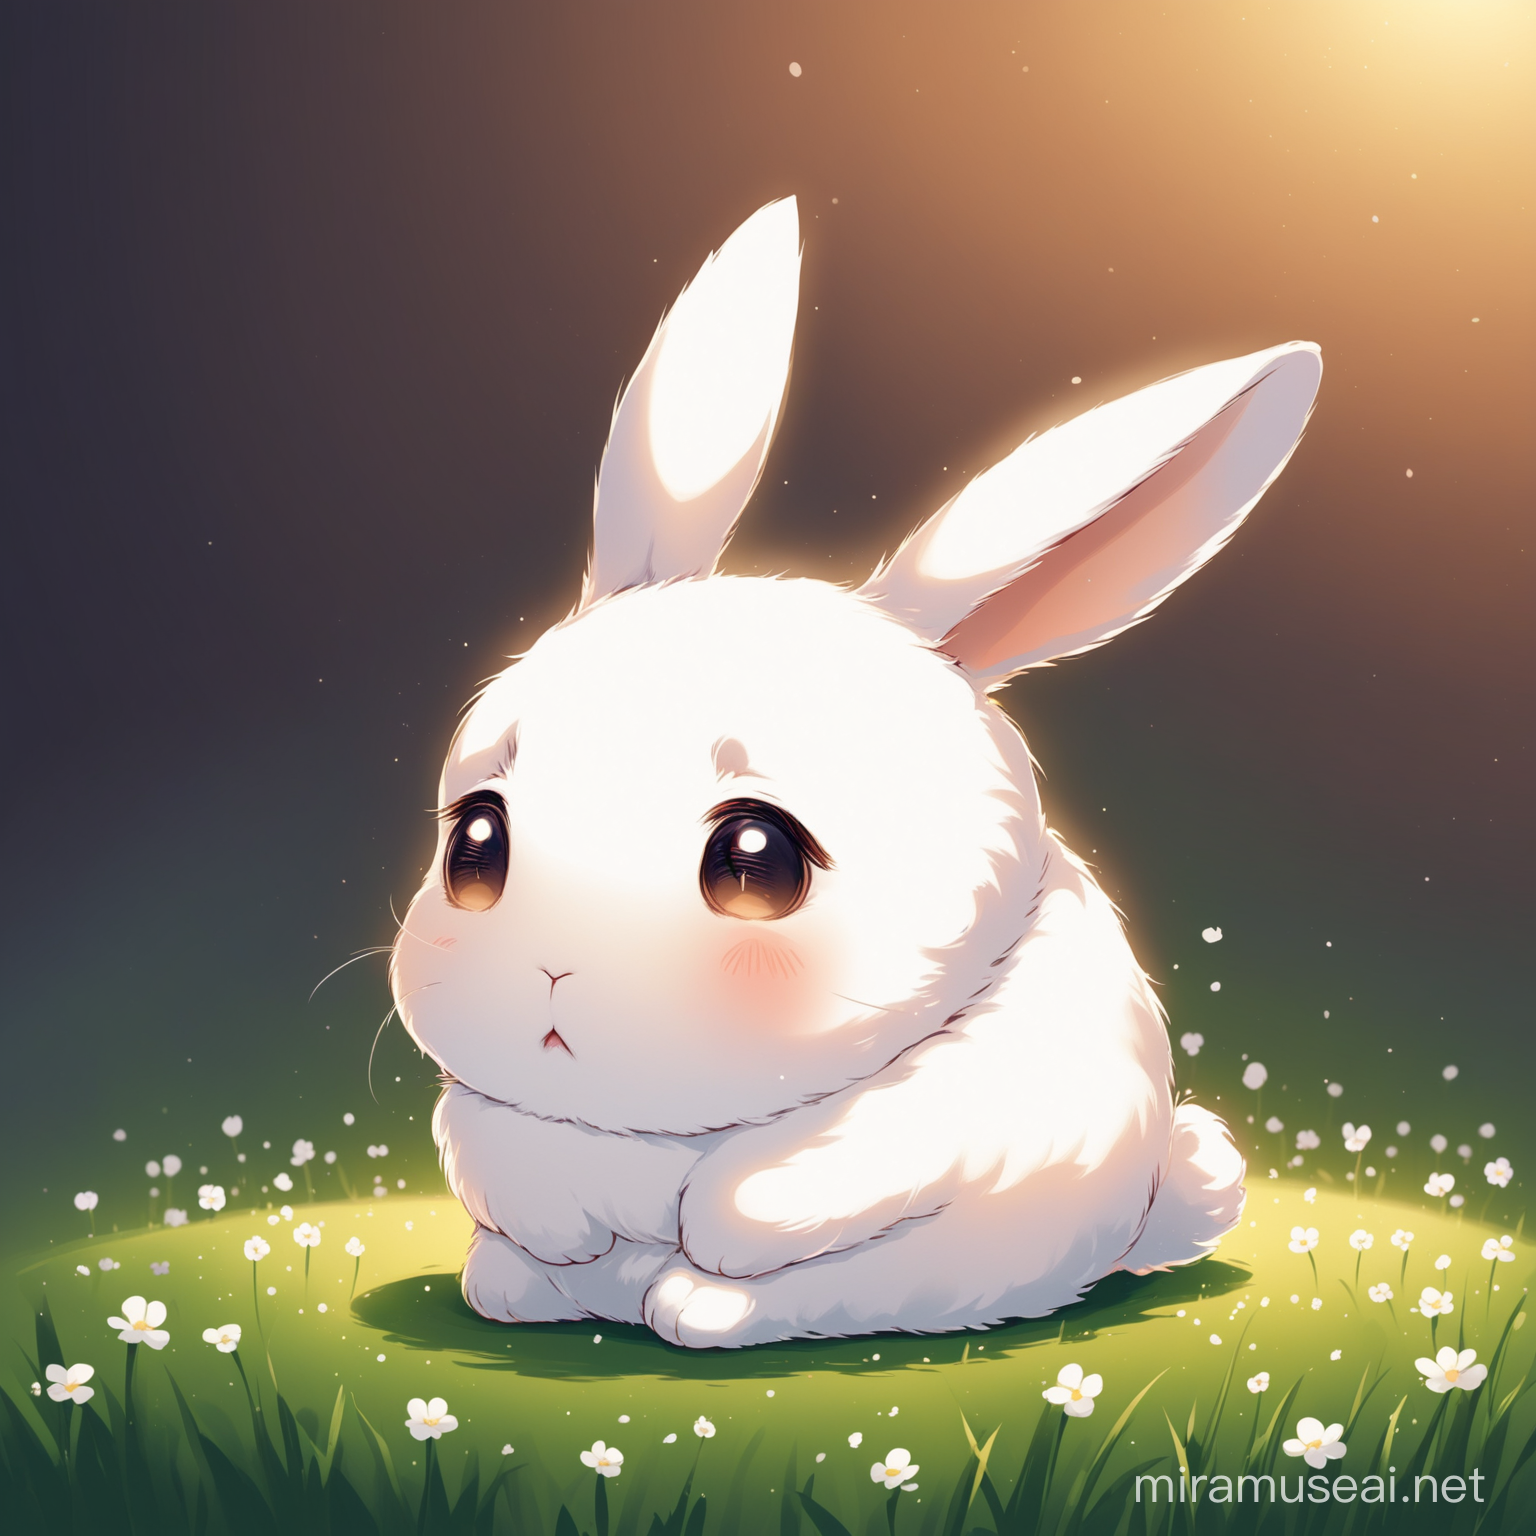 Lonely Hotot Rabbit with Sad Expression